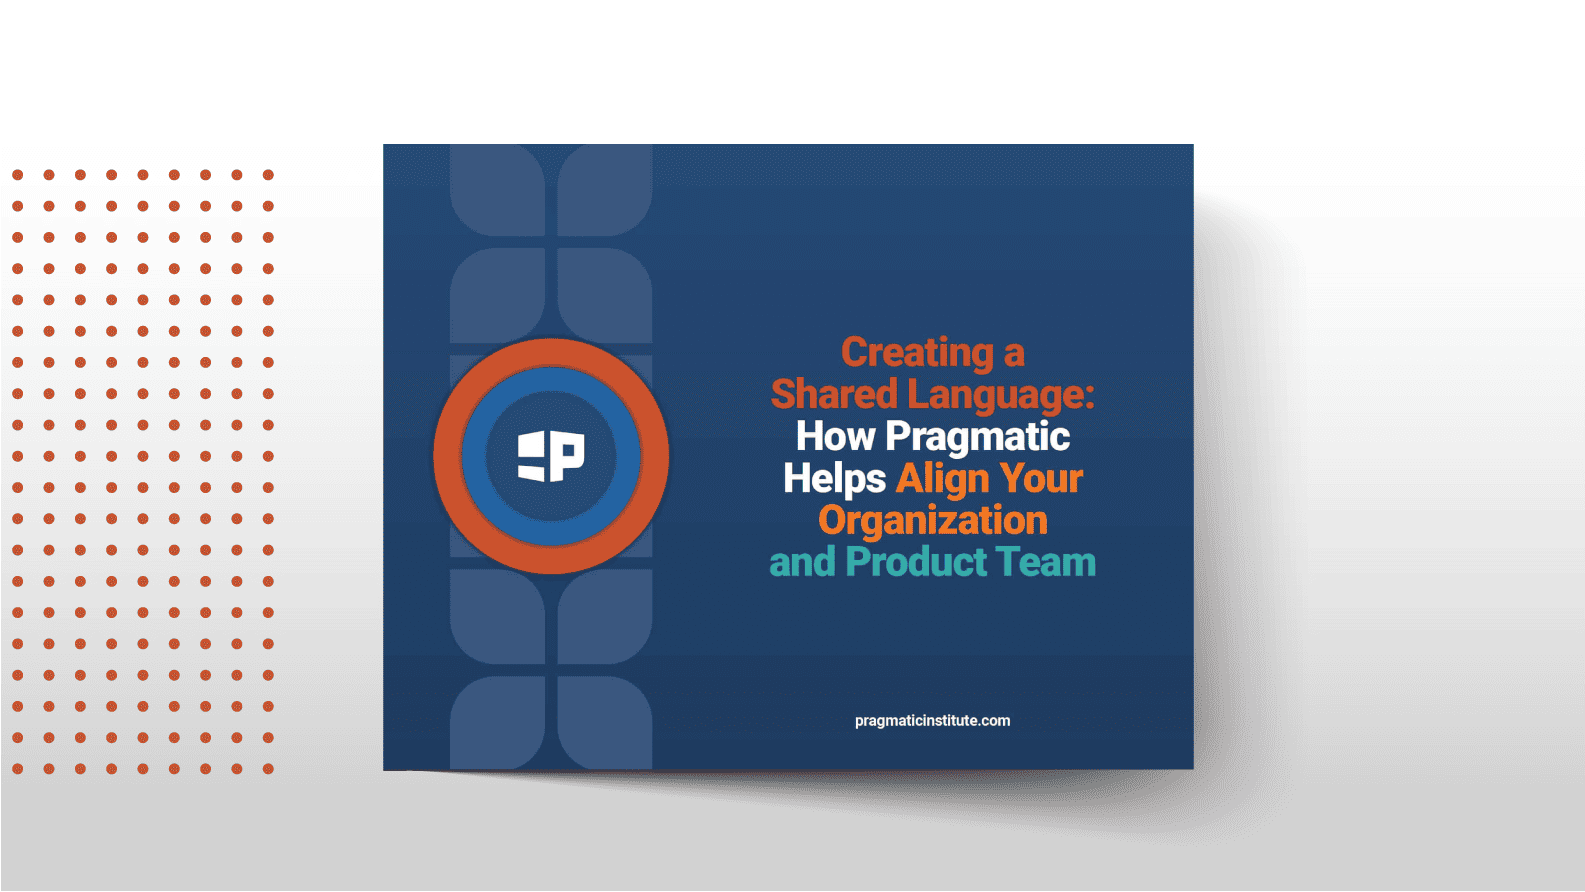 Creating a Shared Language: How Pragmatic Helps Align Your Organization and Product Team